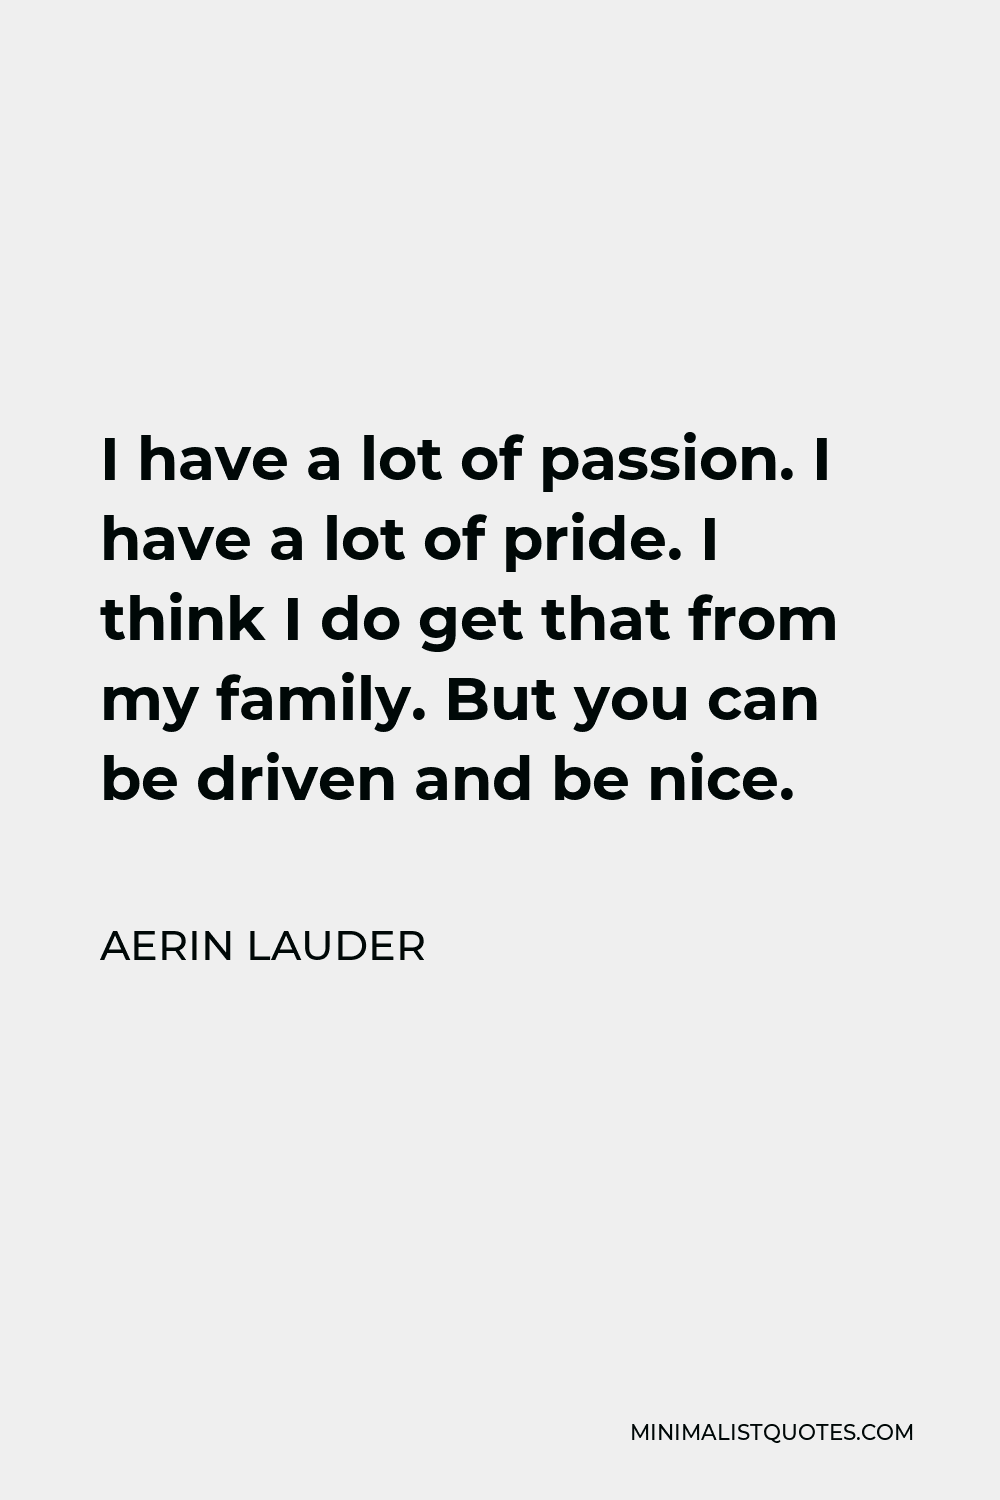 Aerin Lauder Quote - I have a lot of passion. I have a lot of pride. I think I do get that from my family. But you can be driven and be nice.